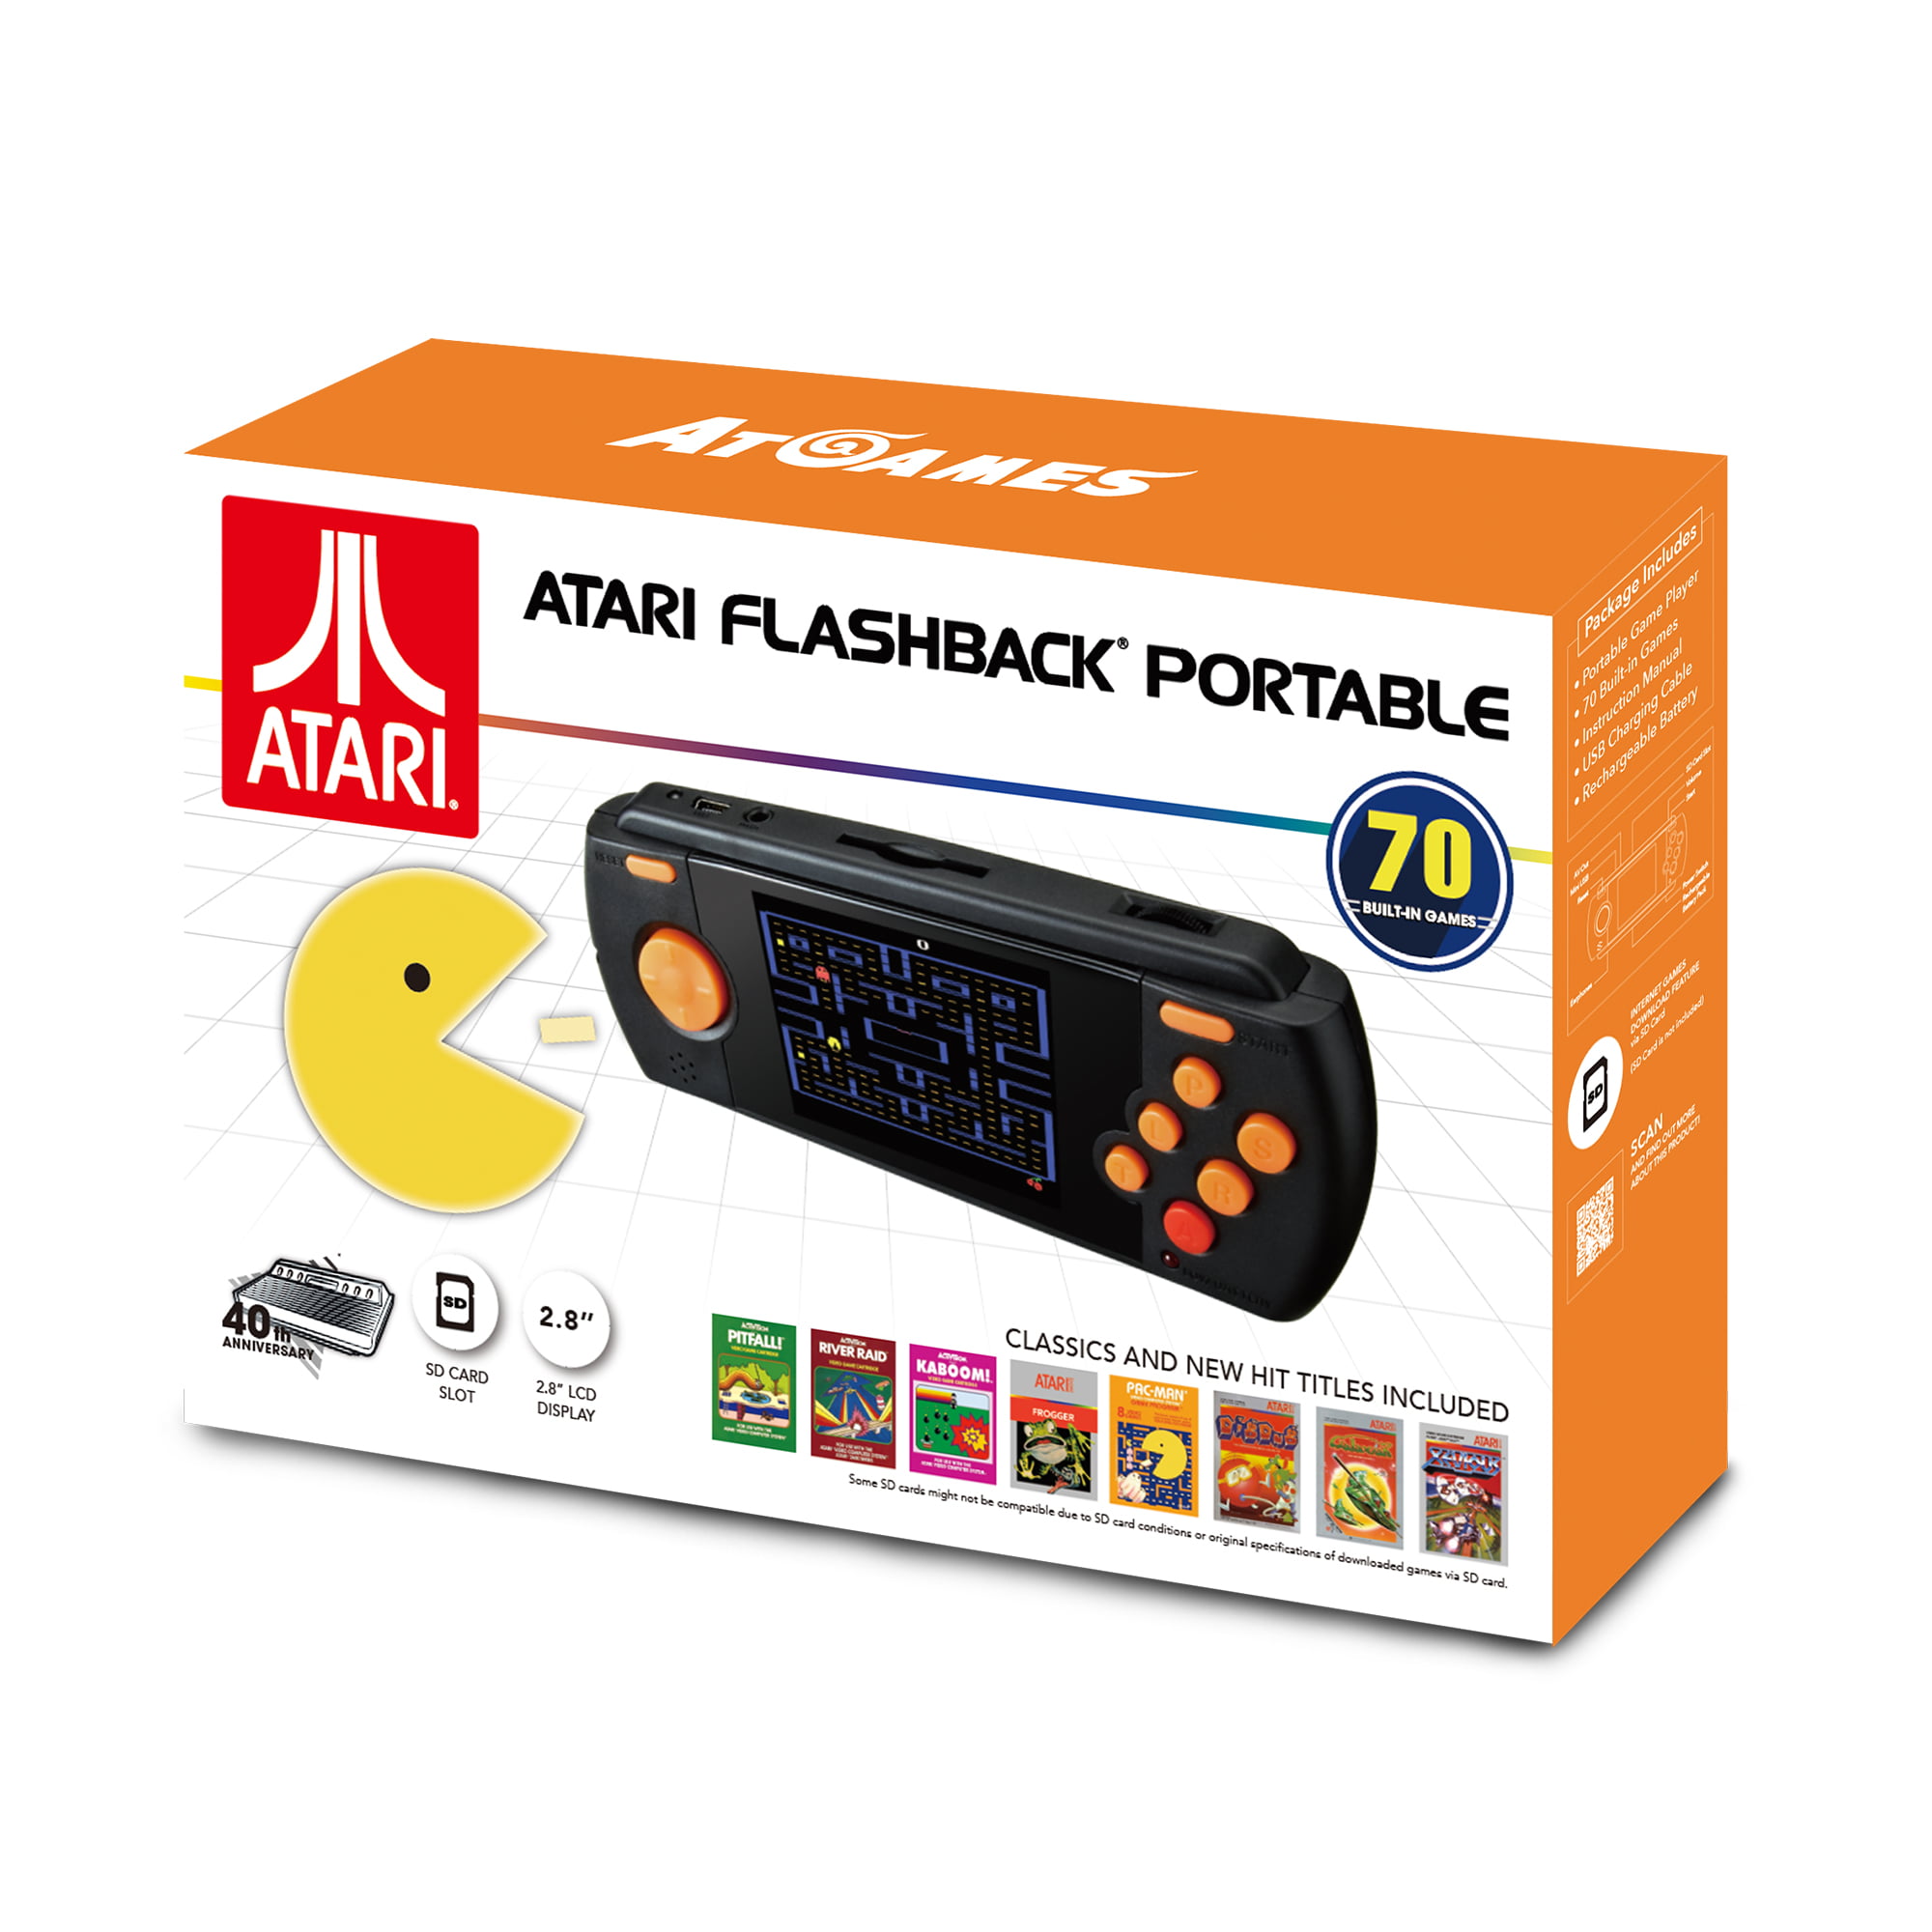 Atari Flashback Portable Game Player Hand Held Game Console